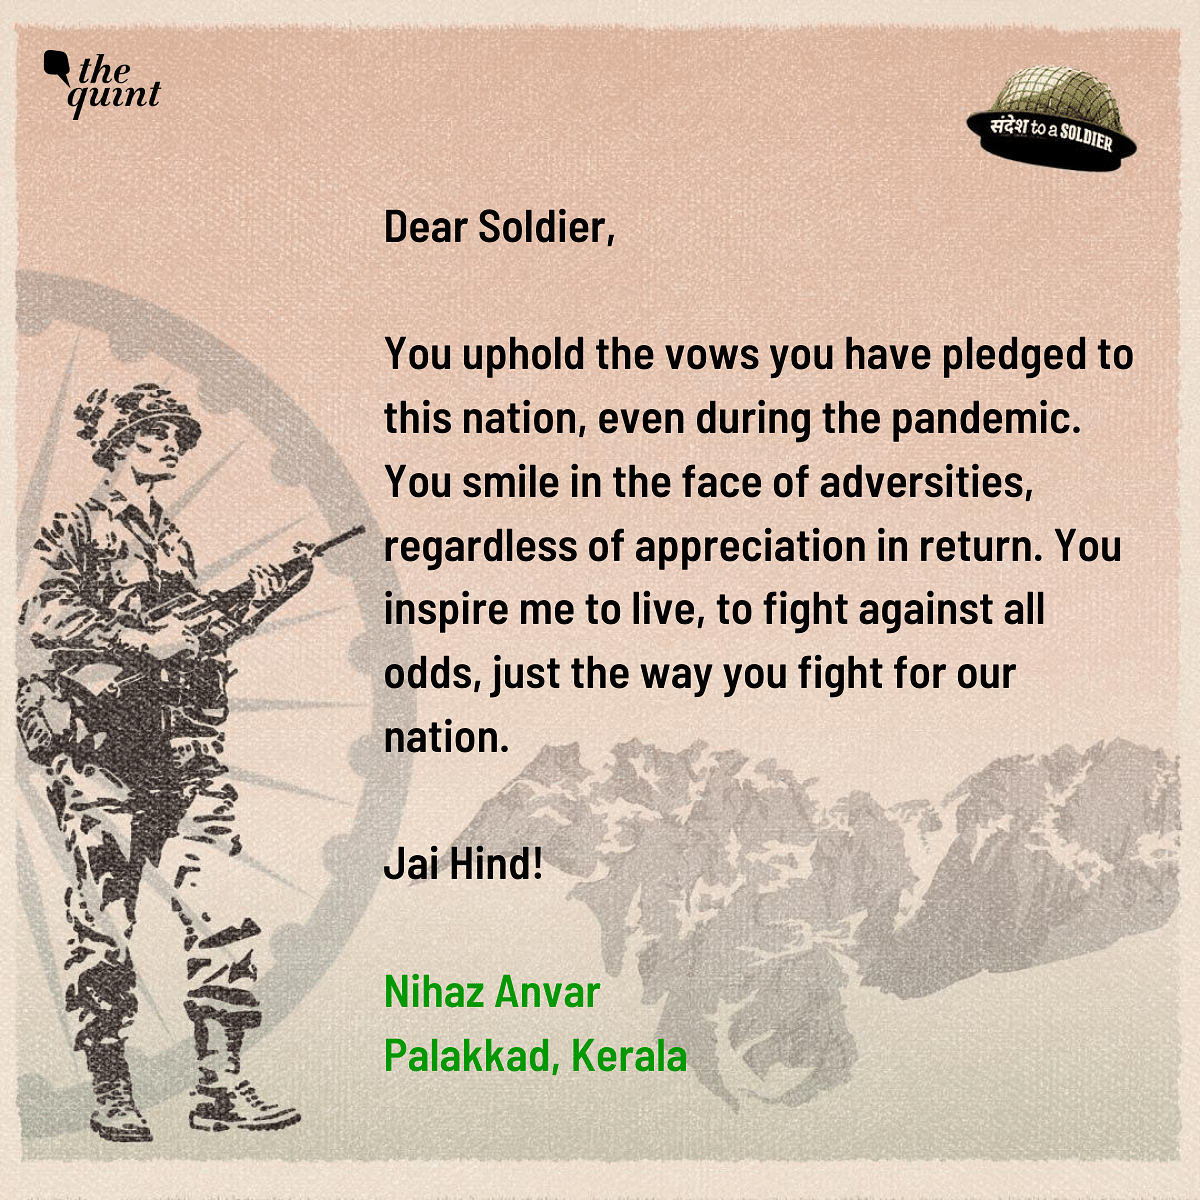 Citizens across India pen down their sandesh to a soldier, honouring their valour and selflessness.